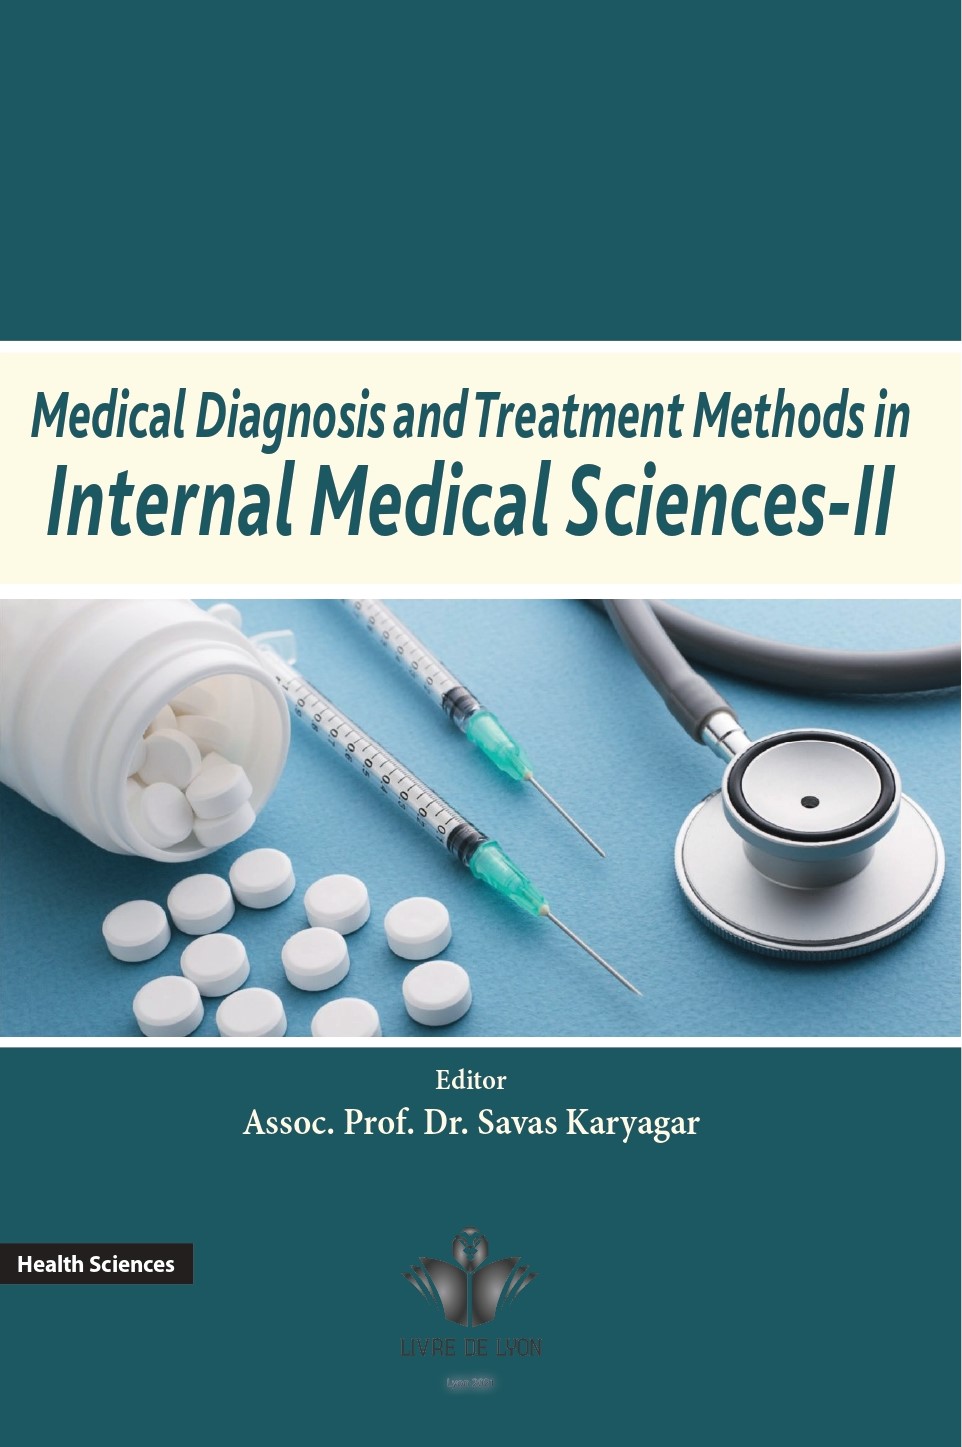 Medical Diagnosis and Treatment Methods in Internal Medical Sciences-II